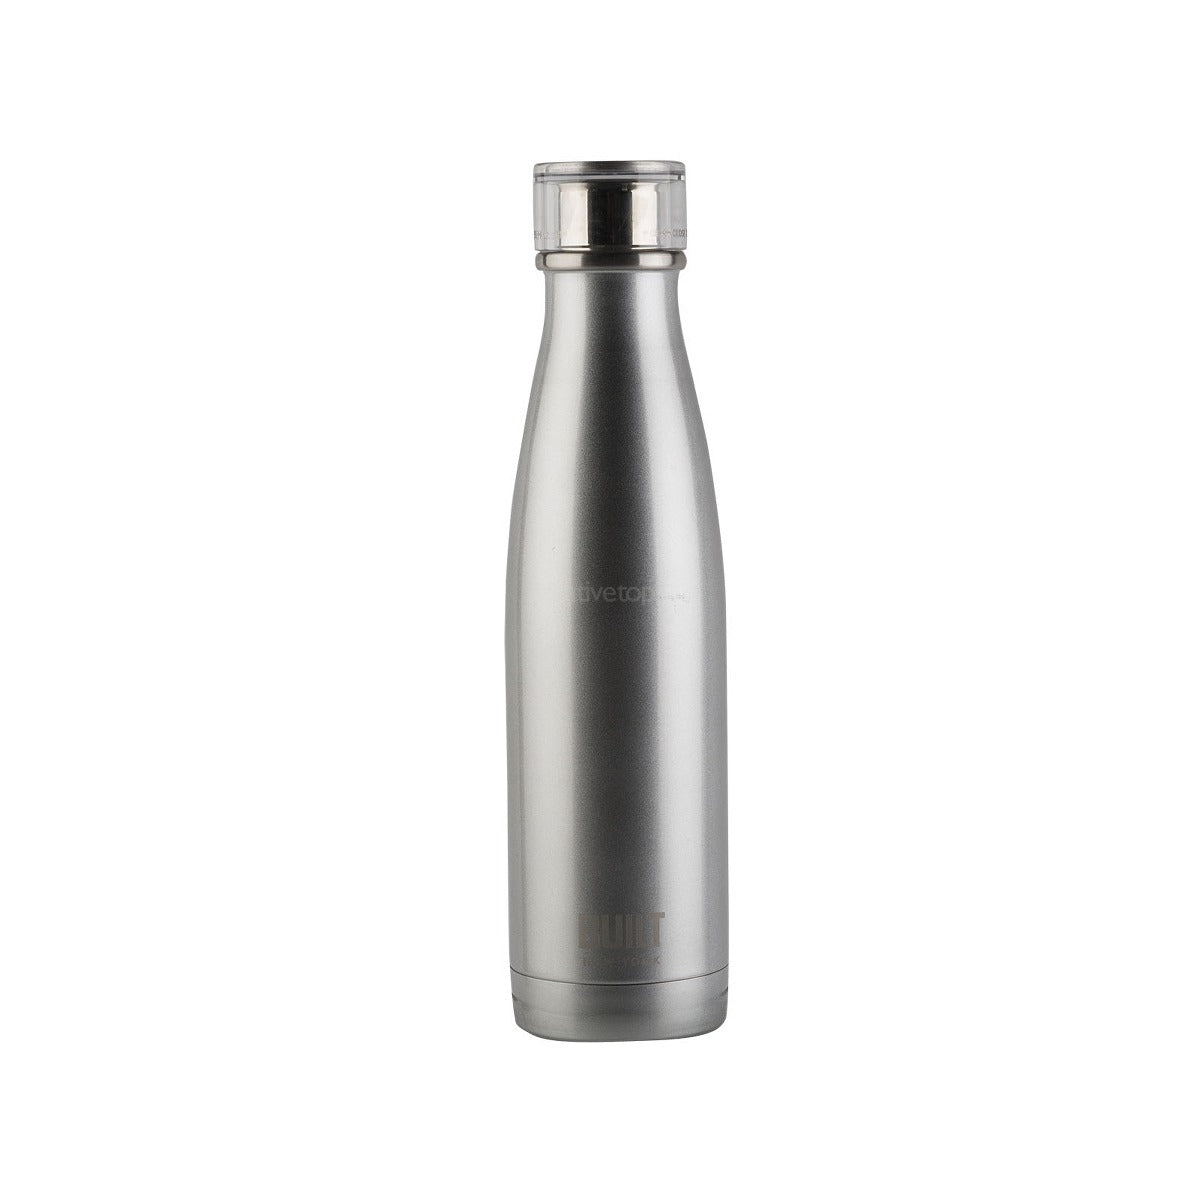 Built Perfect Seal Leakproof Insulated Bottle Metallic 500ml